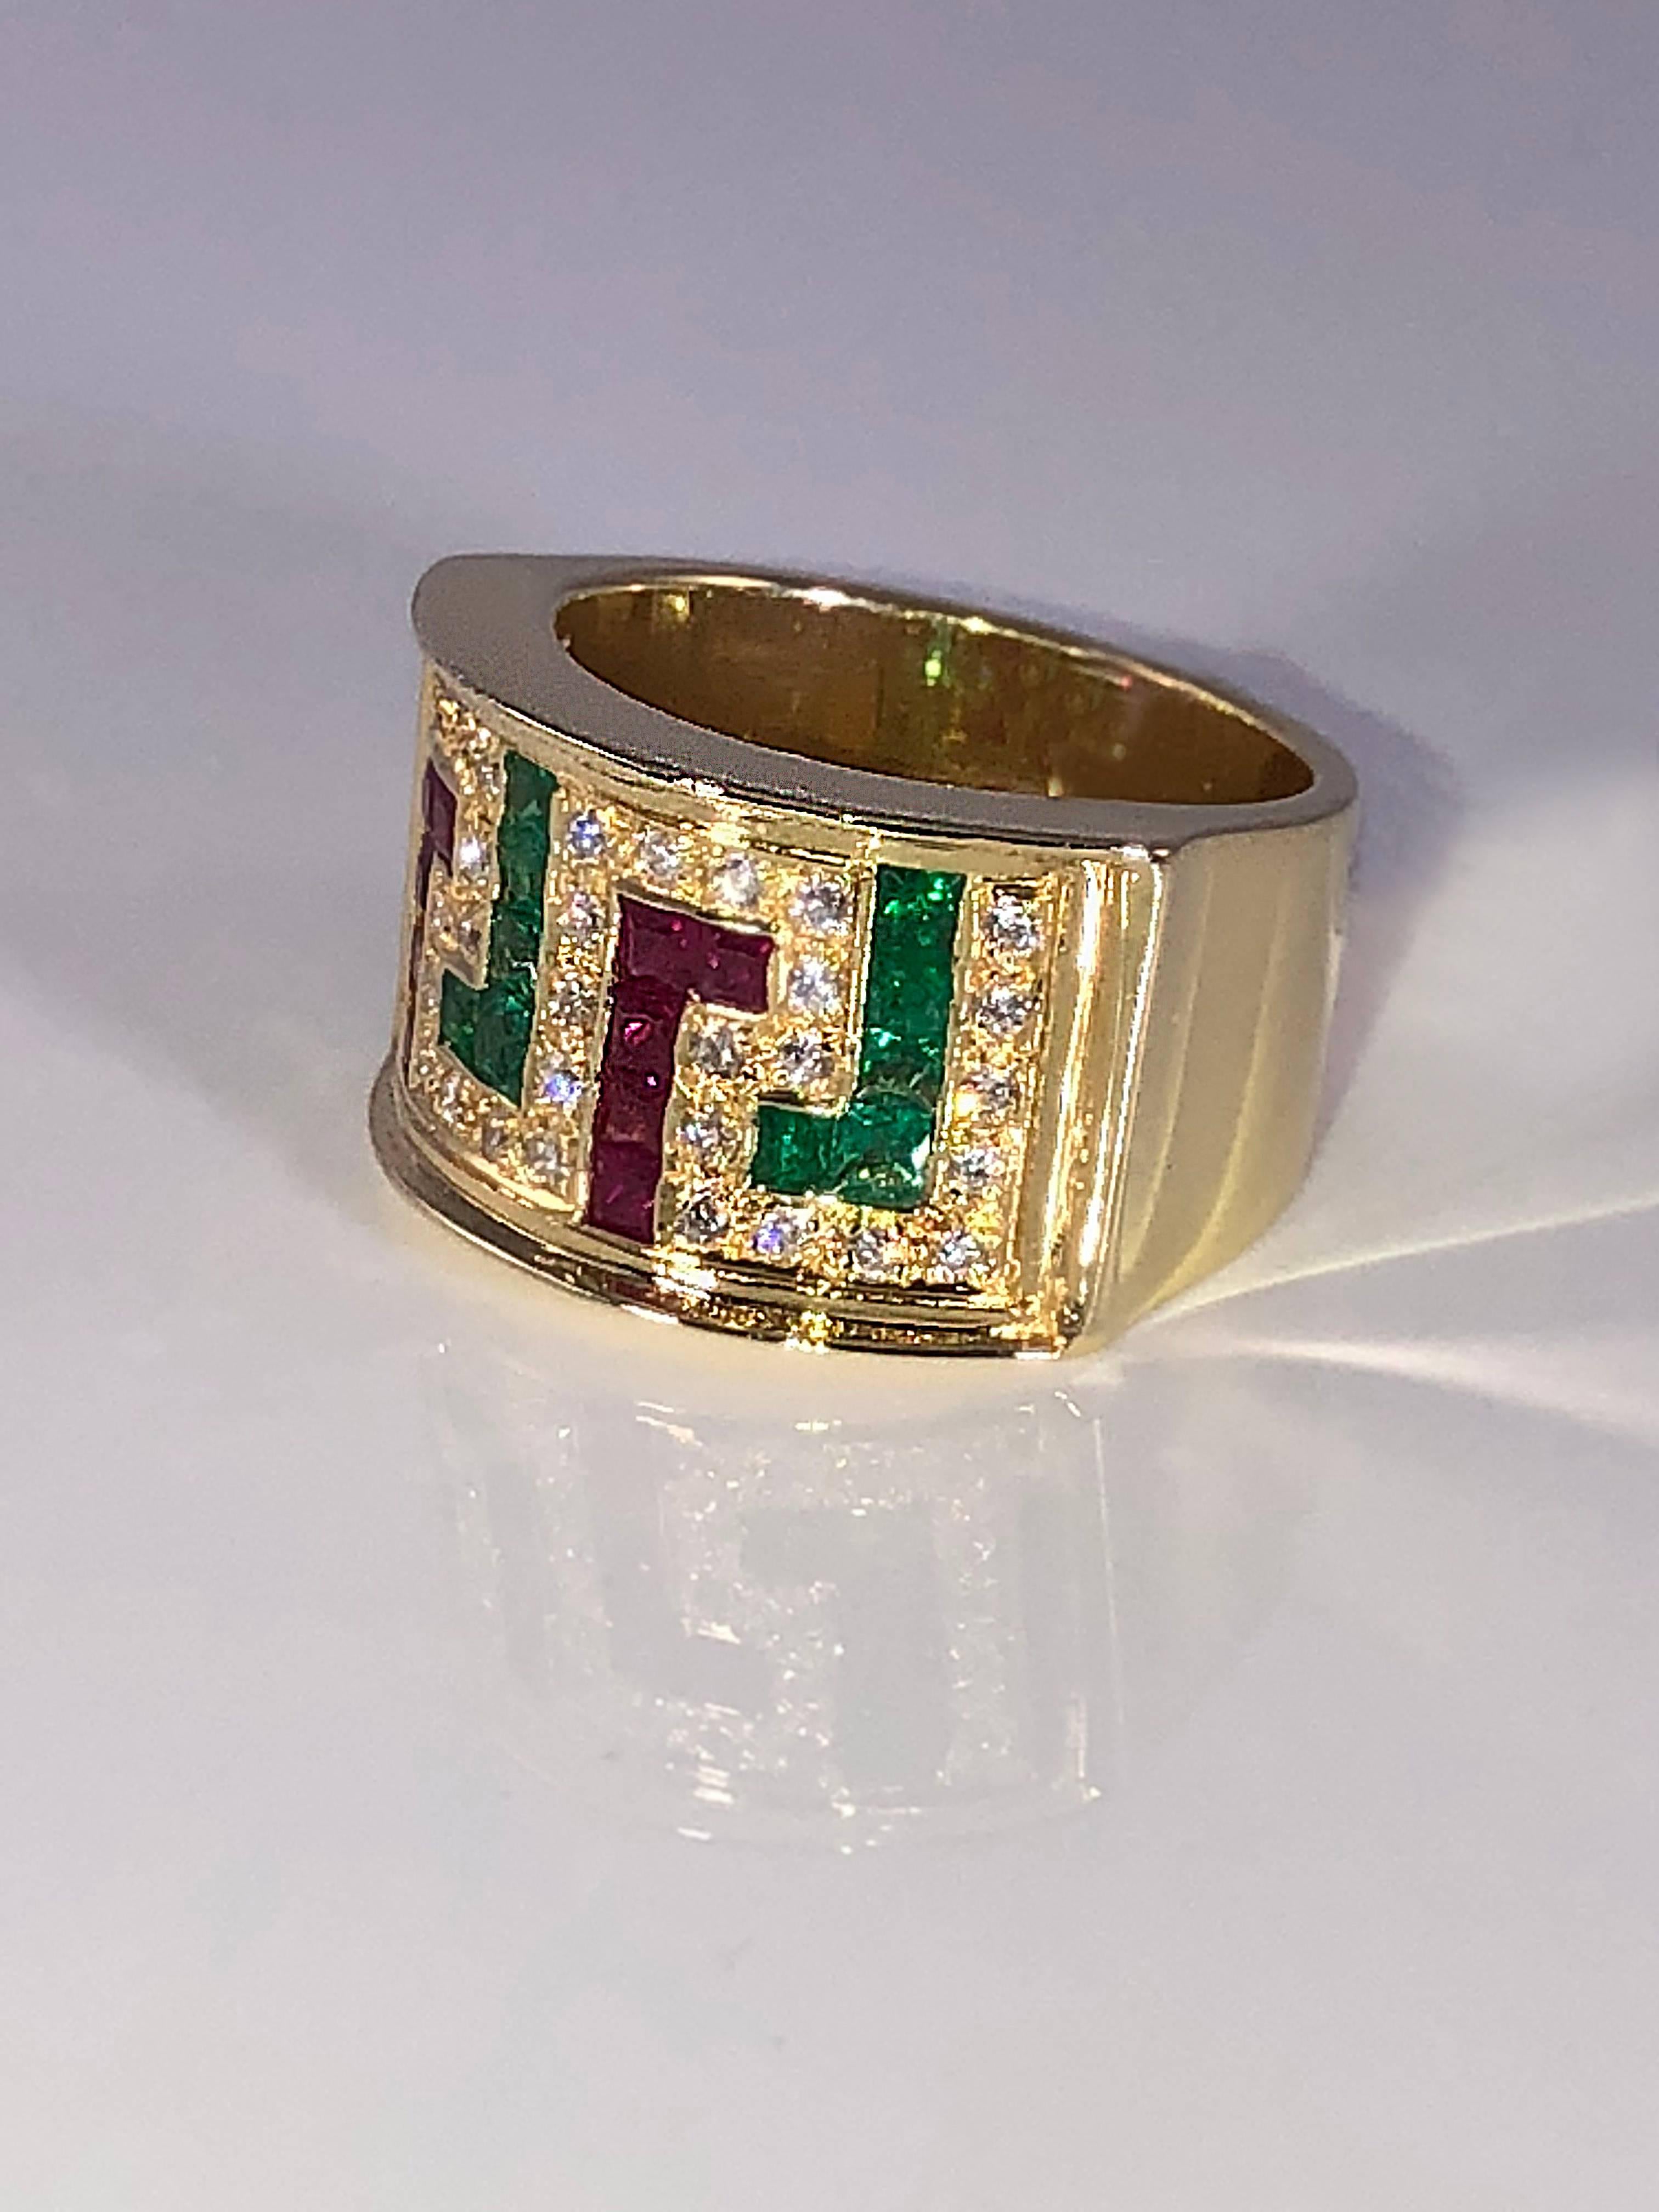 S.Georgios designer 18 Karat Yellow Gold Ring featuring the Greek Key design symbolizing eternity. The ring is all handmade and has Brilliant Cut White Diamonds total weight of 0.40 Carat, and Princess cut Rubies and Emeralds total weight of 1.35